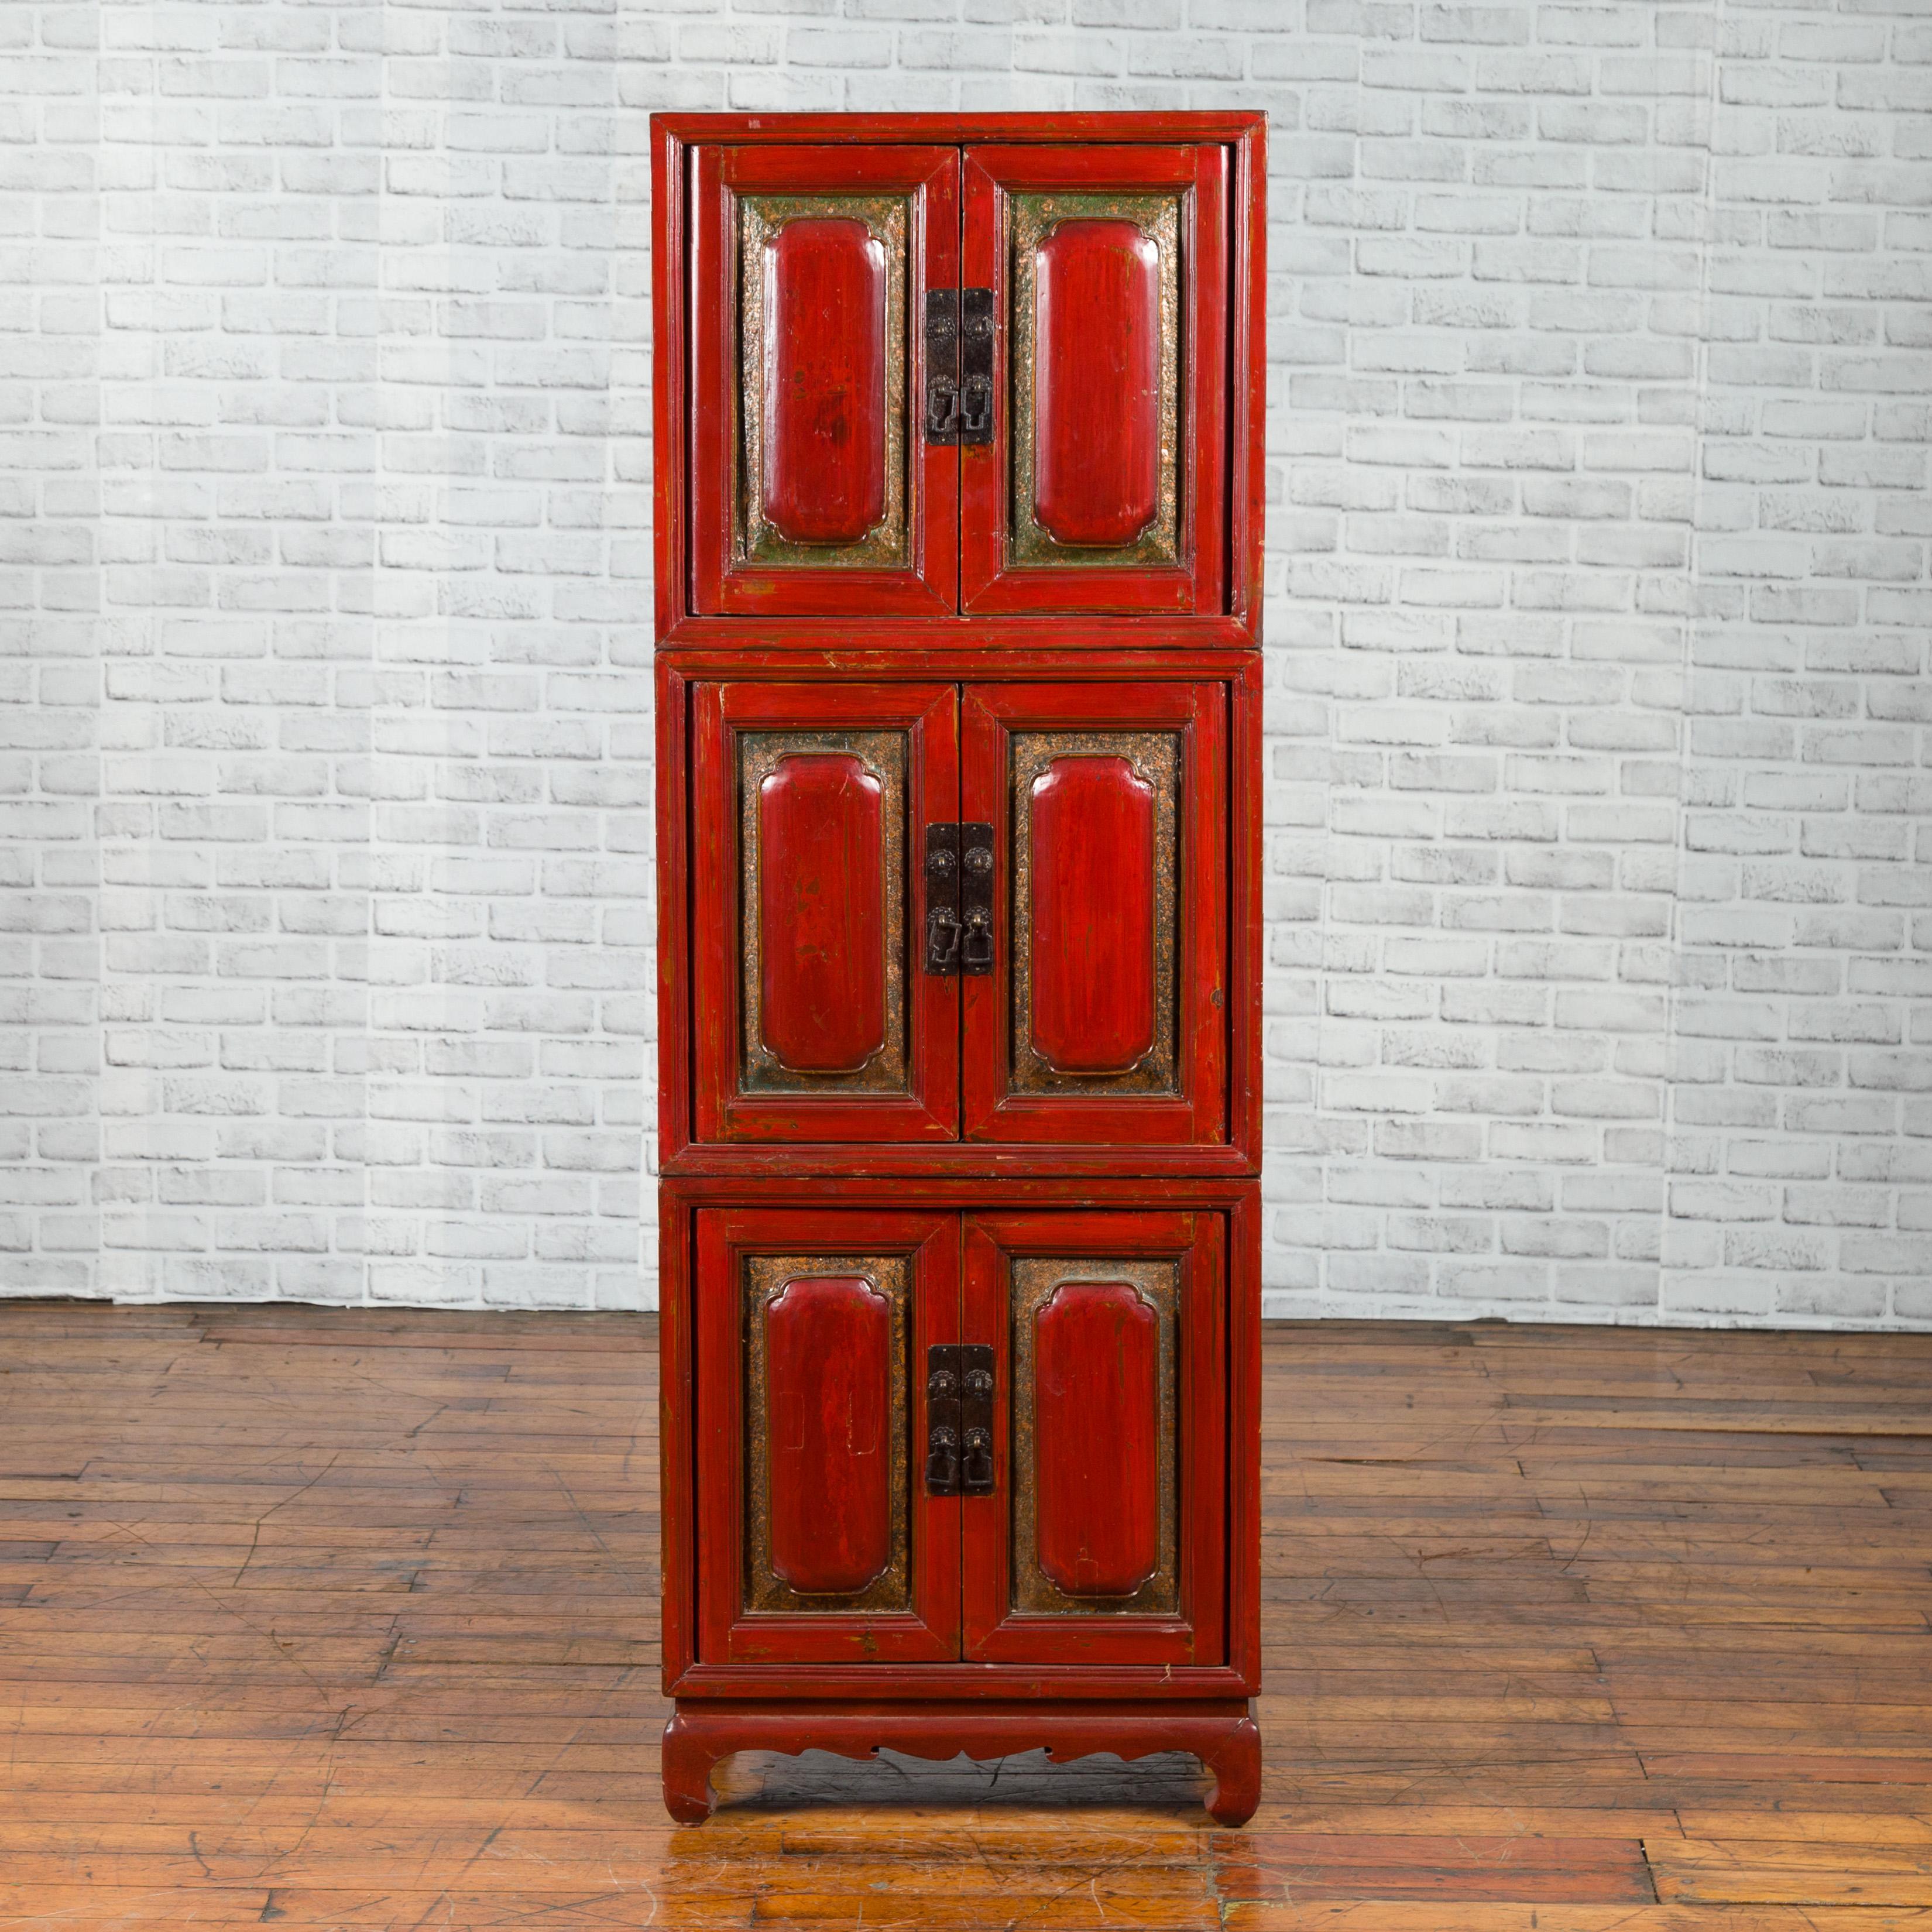 A Chinese red lacquered three-section stackable cabinet from the early 20th century, with polychrome lacquer. Created in China during the early years of the 20th century, this red lacquered cabinet is made of three independent sections stacked